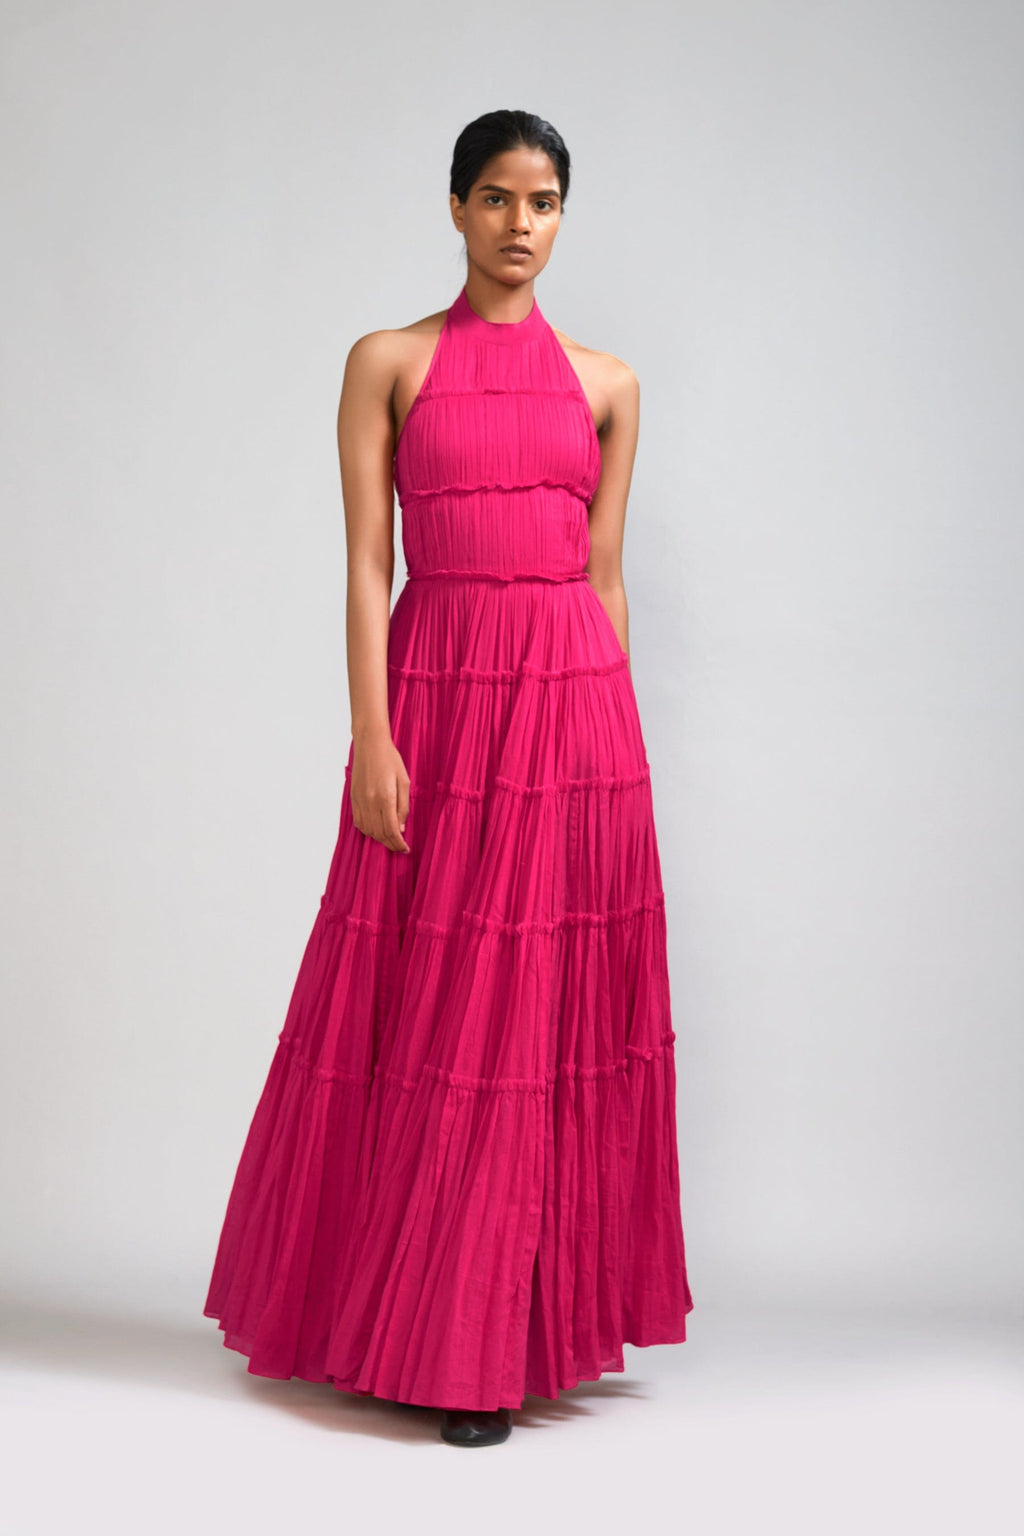 Mati Dresses XS Pink Backless Tiered Gown